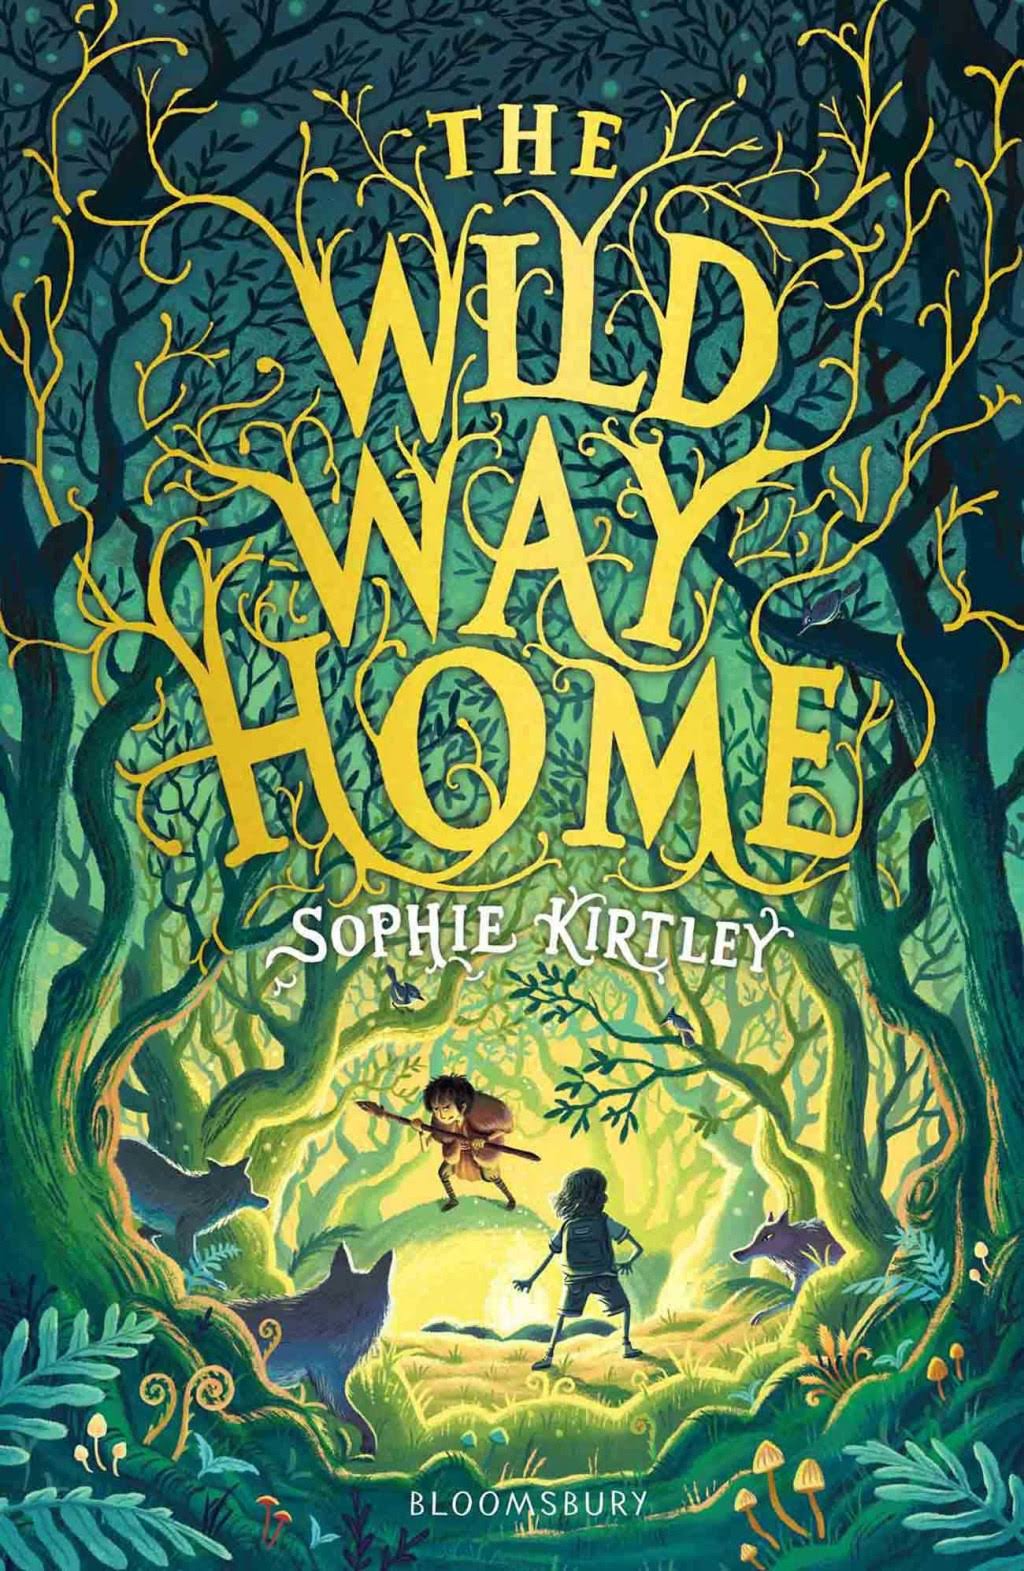 The Wild Way Home [Book]